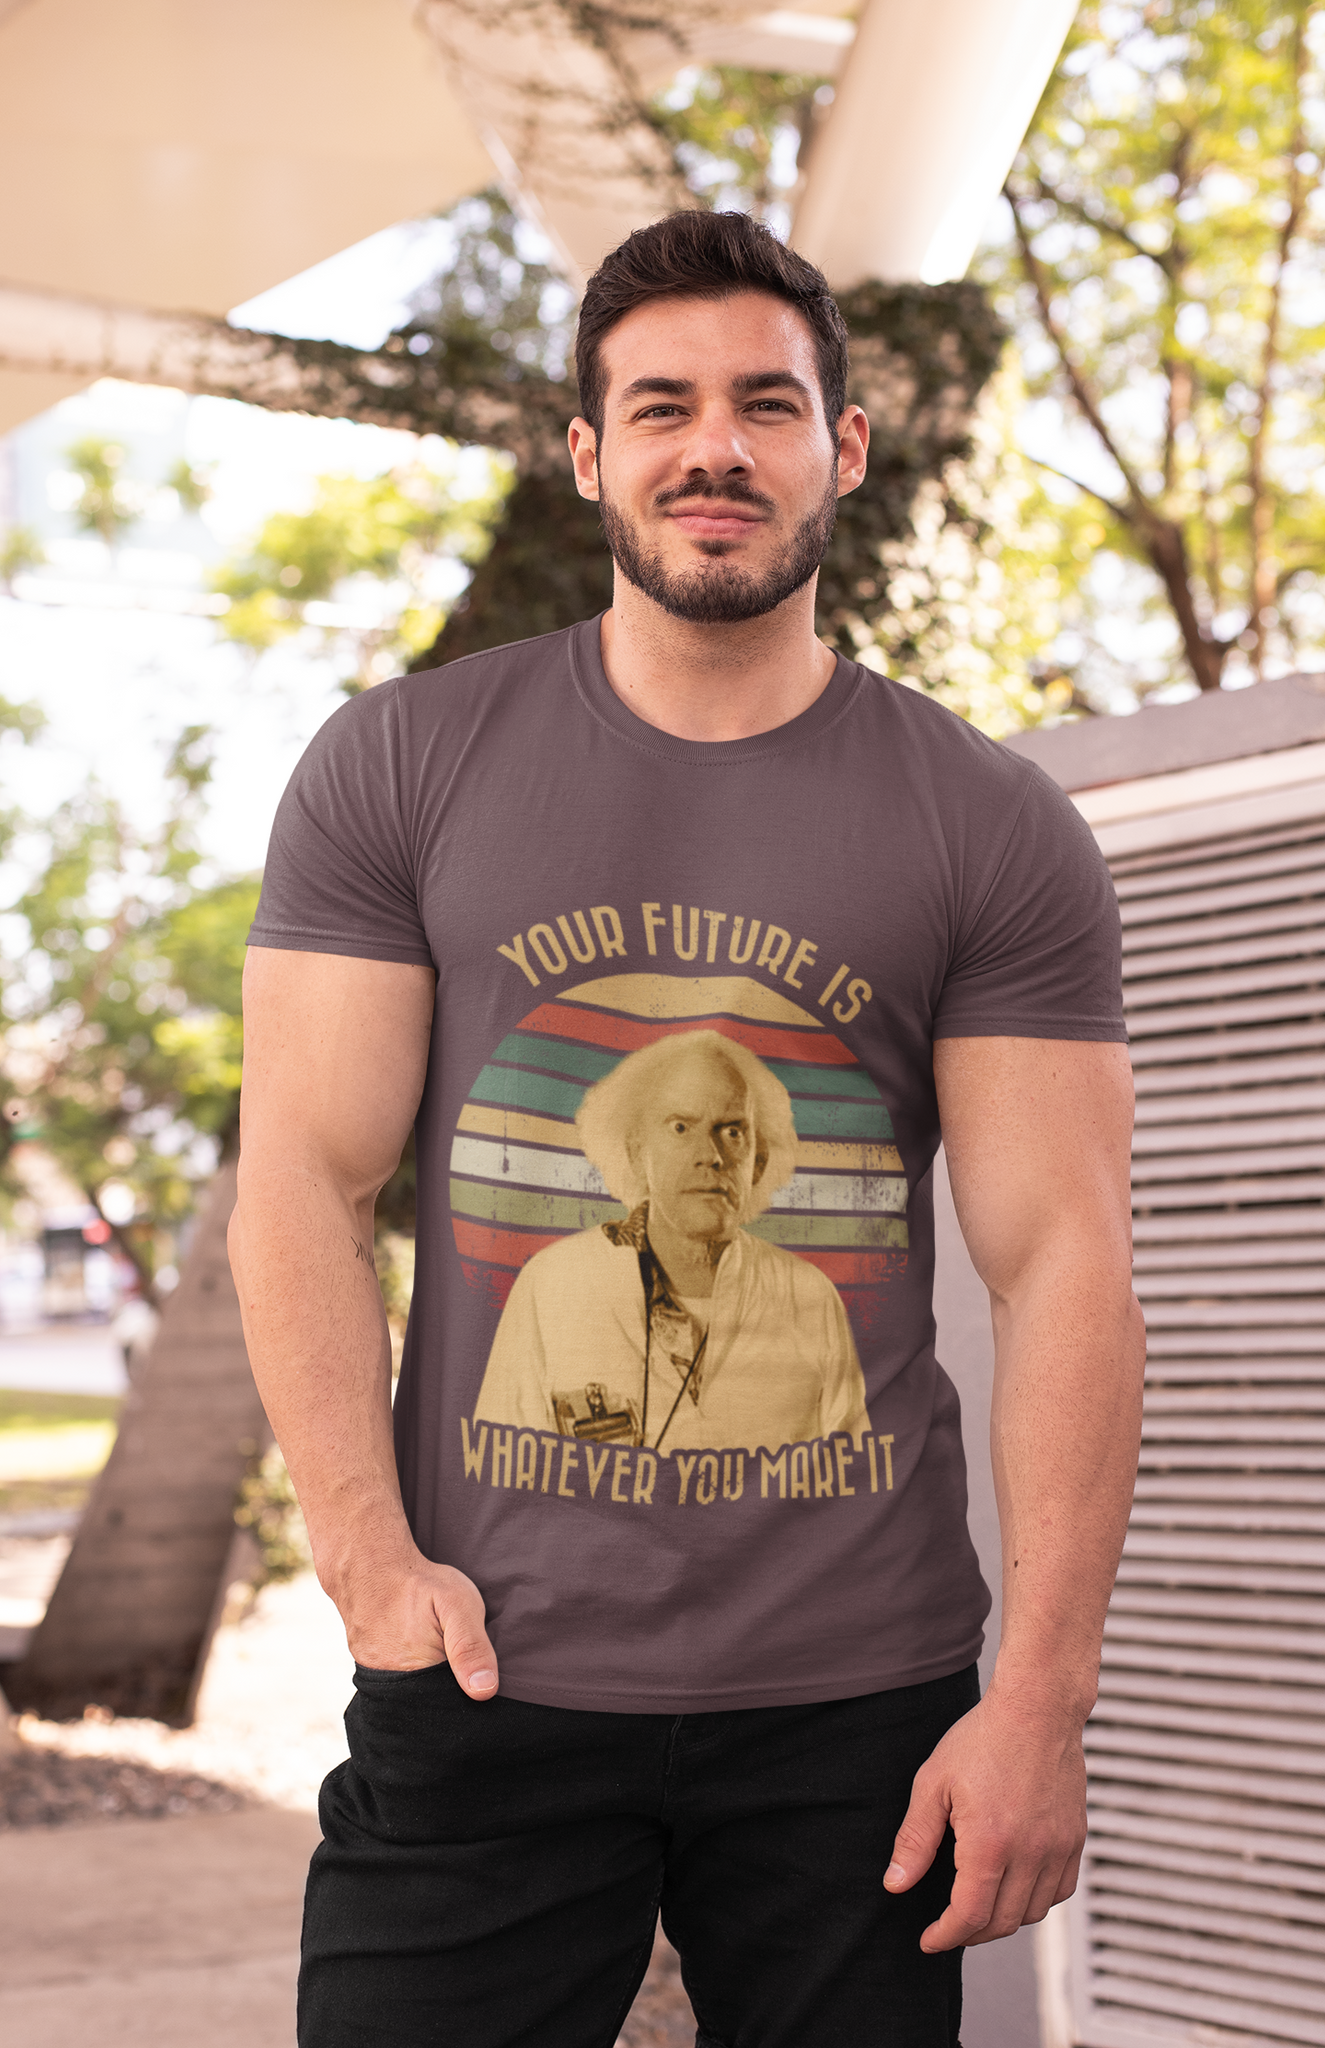 Back To The Future Movie T Shirt, Doc Brown T Shirt, Your Future Is Whatever You Make It Tshirt